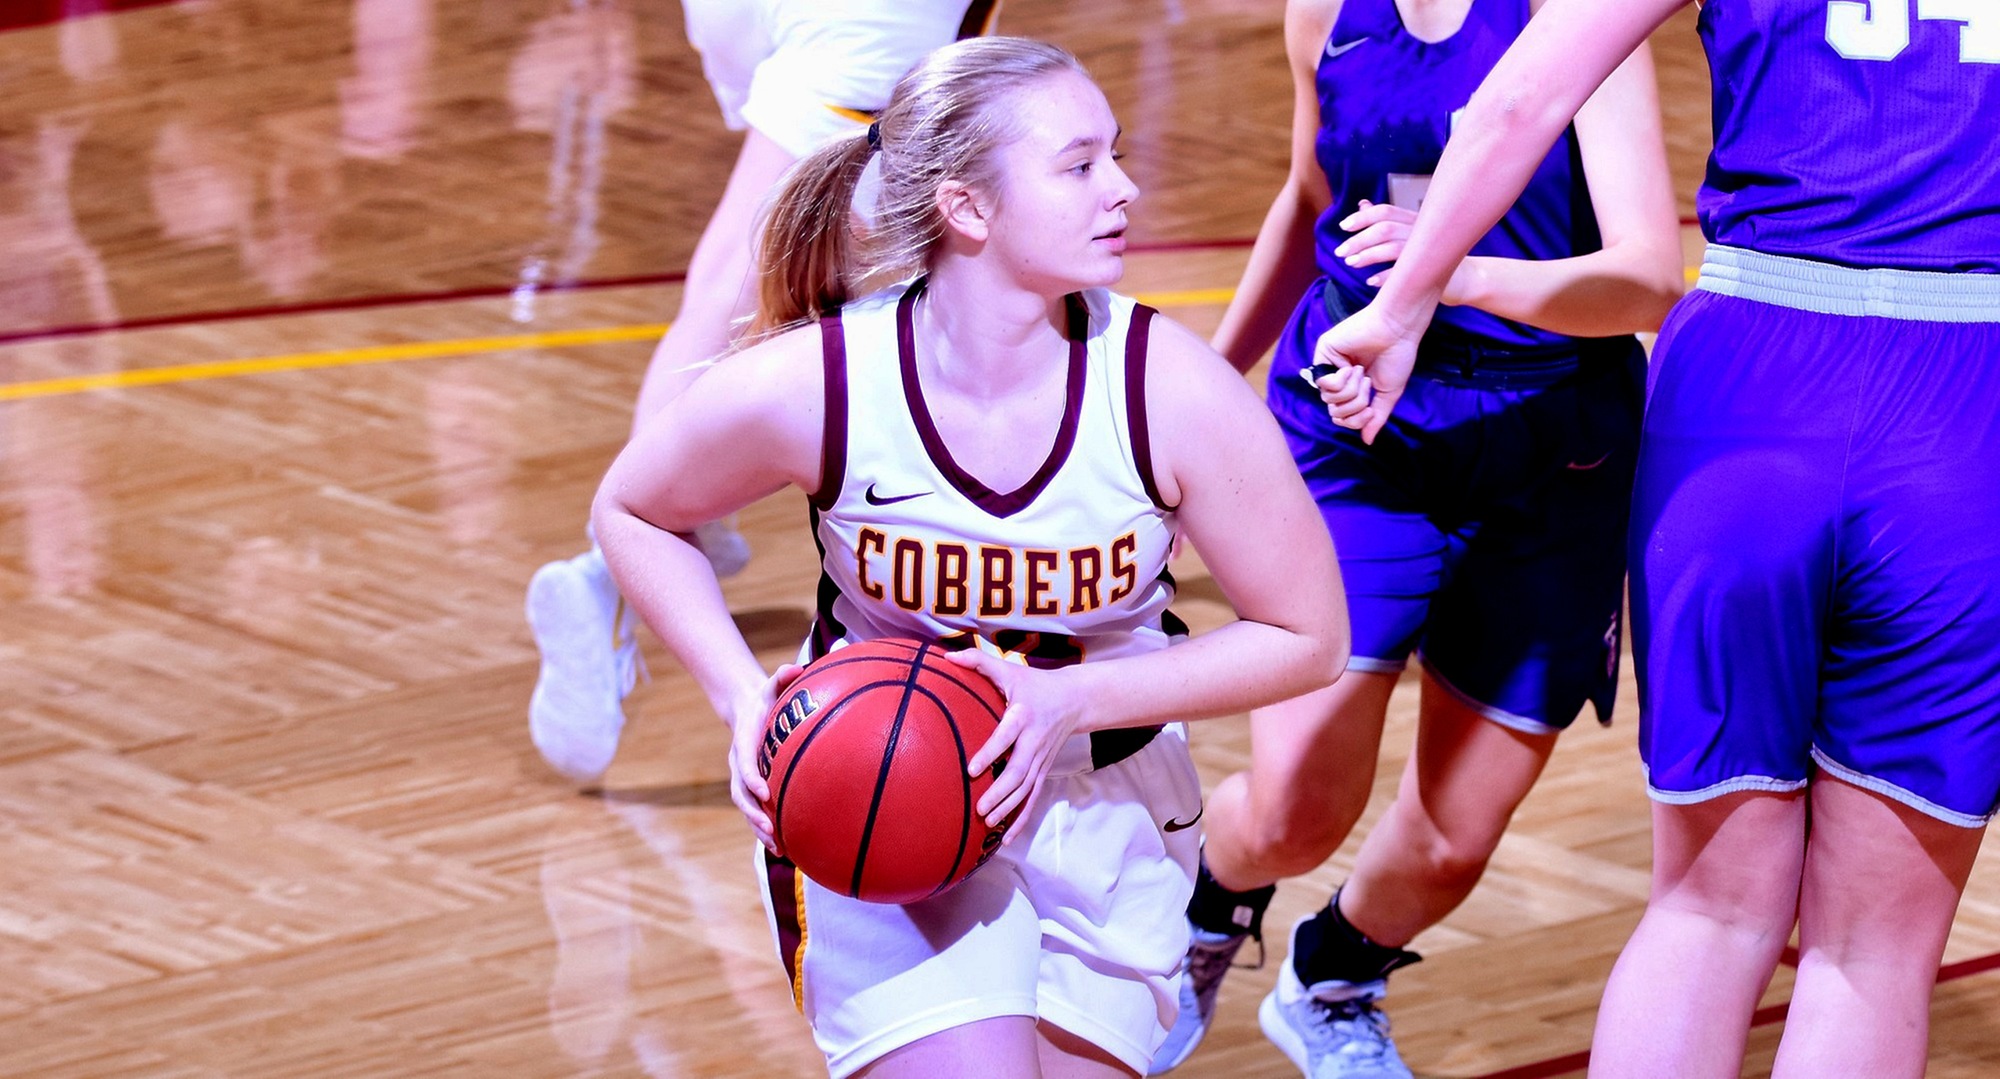 Sophomore Bailee Larson recorded the first double-double of her career as she scored 11 points and grabbed 10 rebounds to help Concordia beat Macalester.